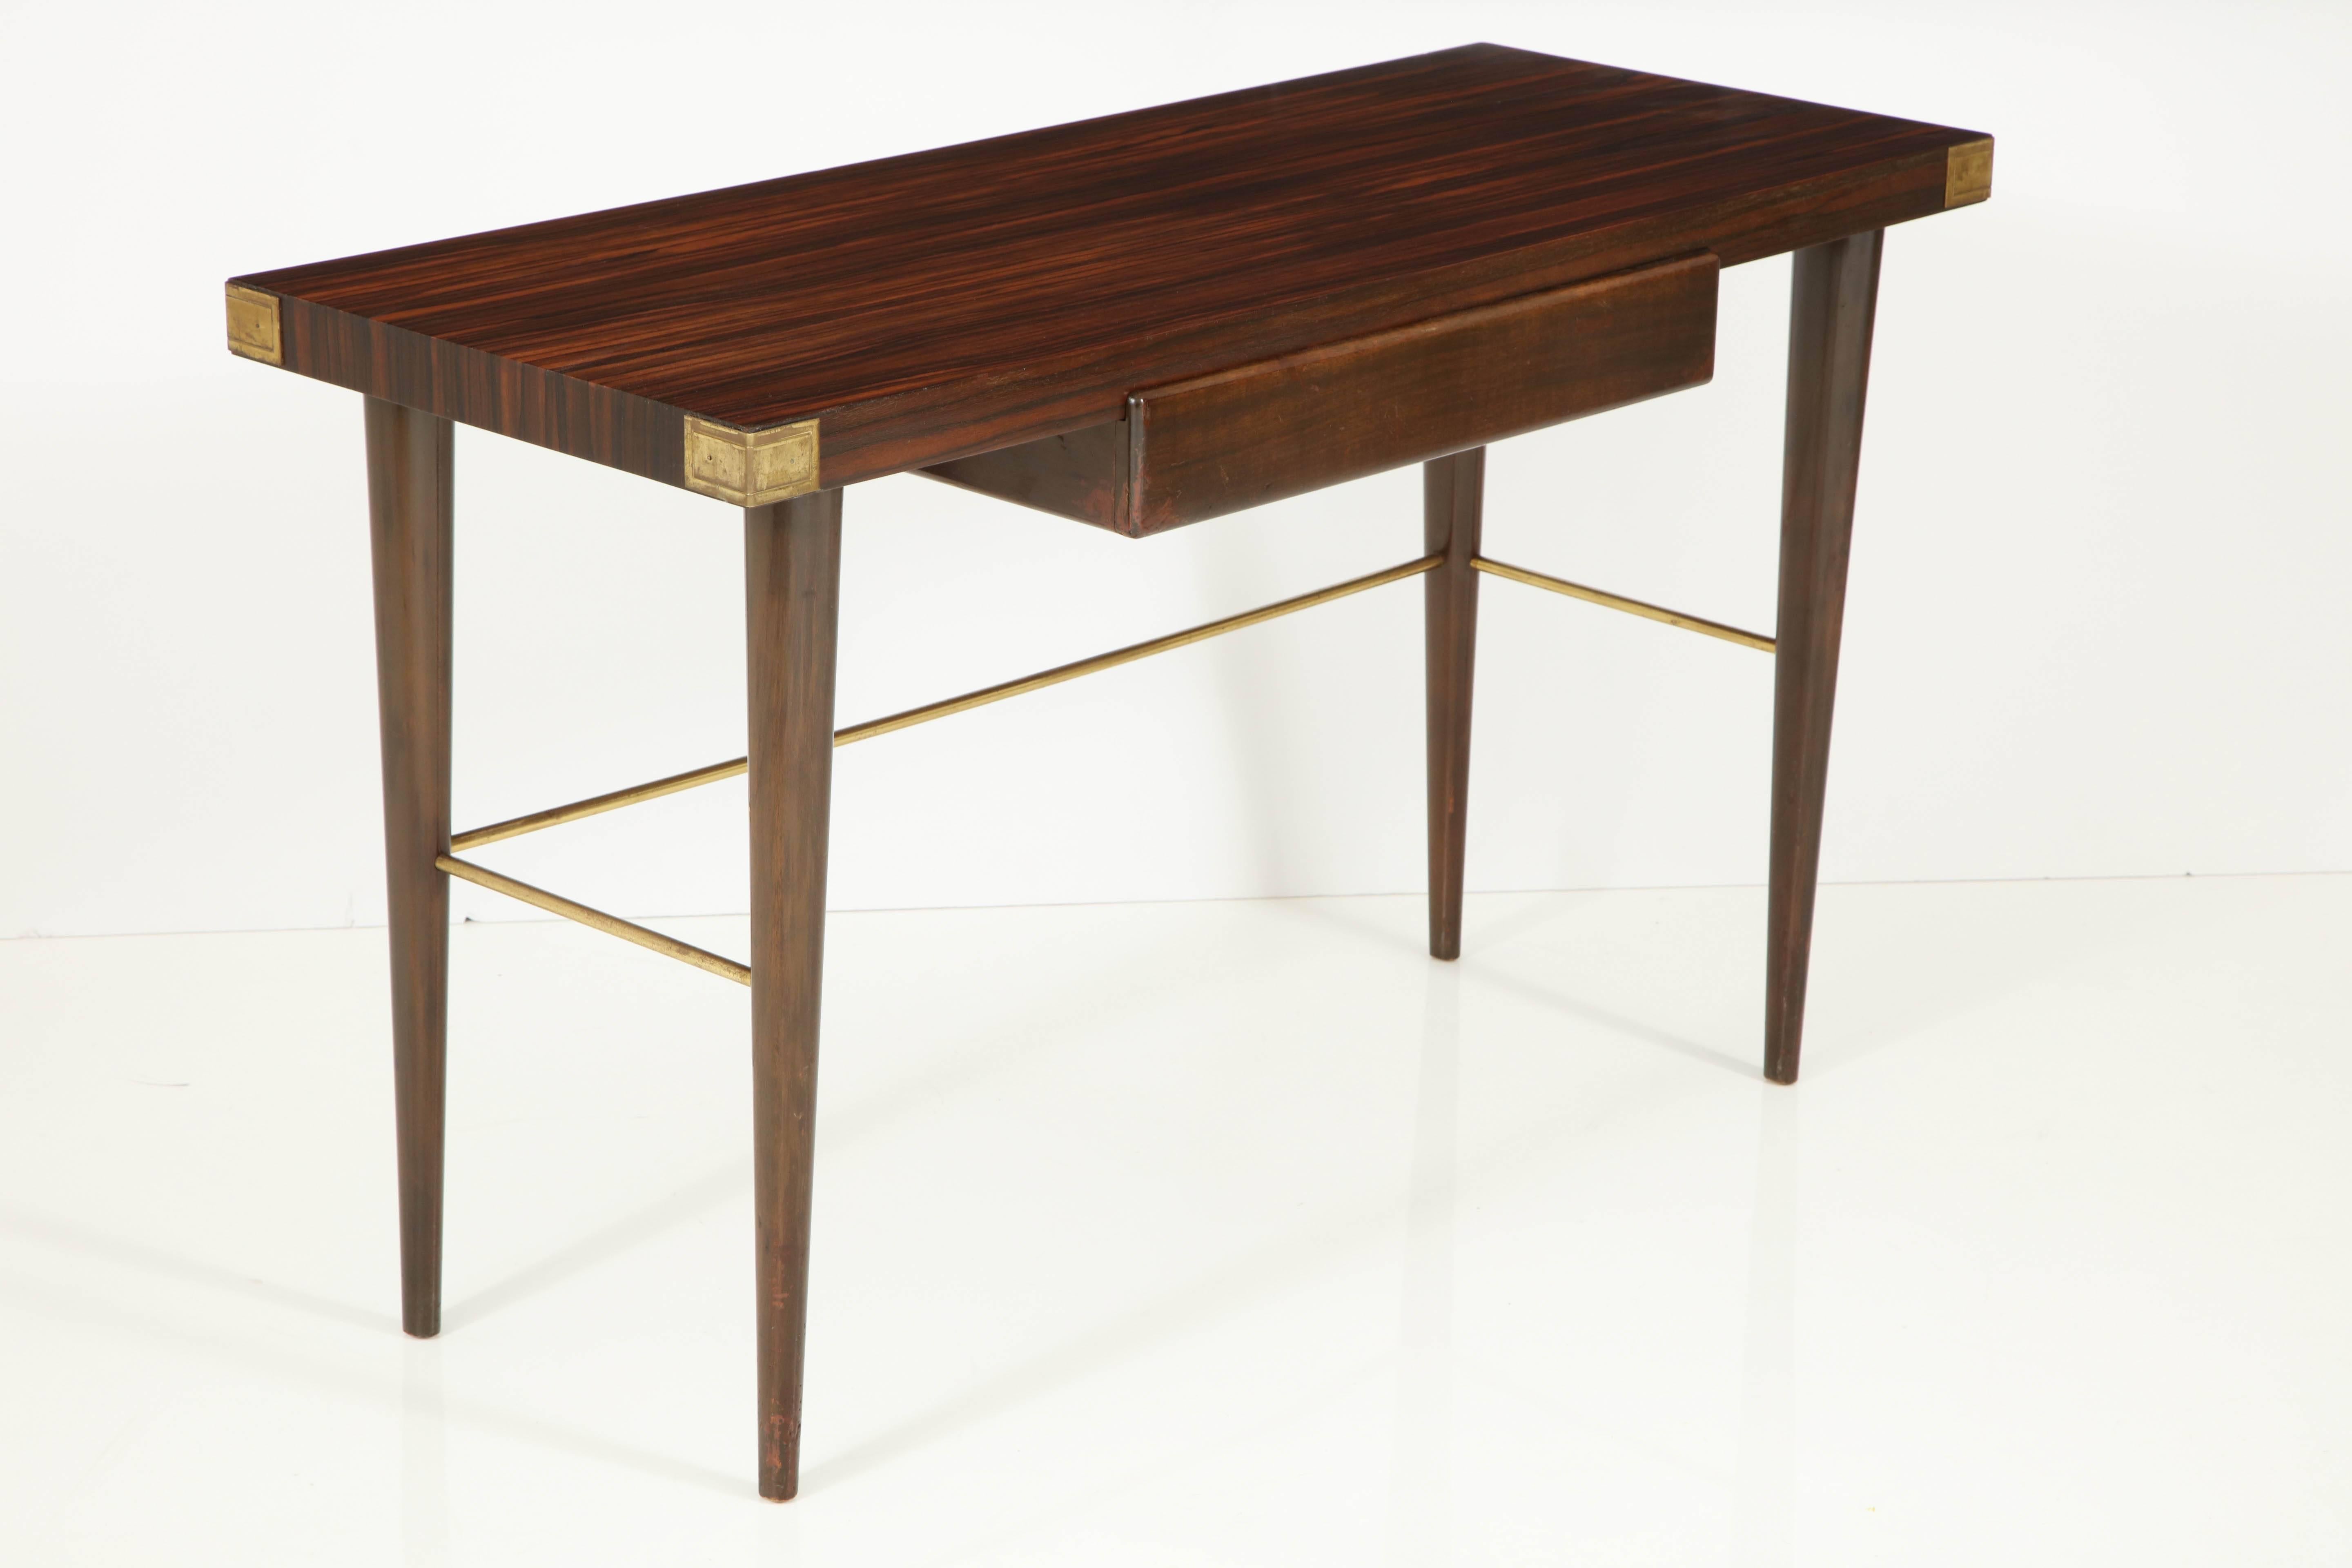 Sexy one-drawer desk with extravagantly grained Macassar ebony surface on mahogany legs with brass stretchers and corner decoration. Has a raised drawer front detail, mirrored-imaged on the desk backside, allowing for floating placement. Partial